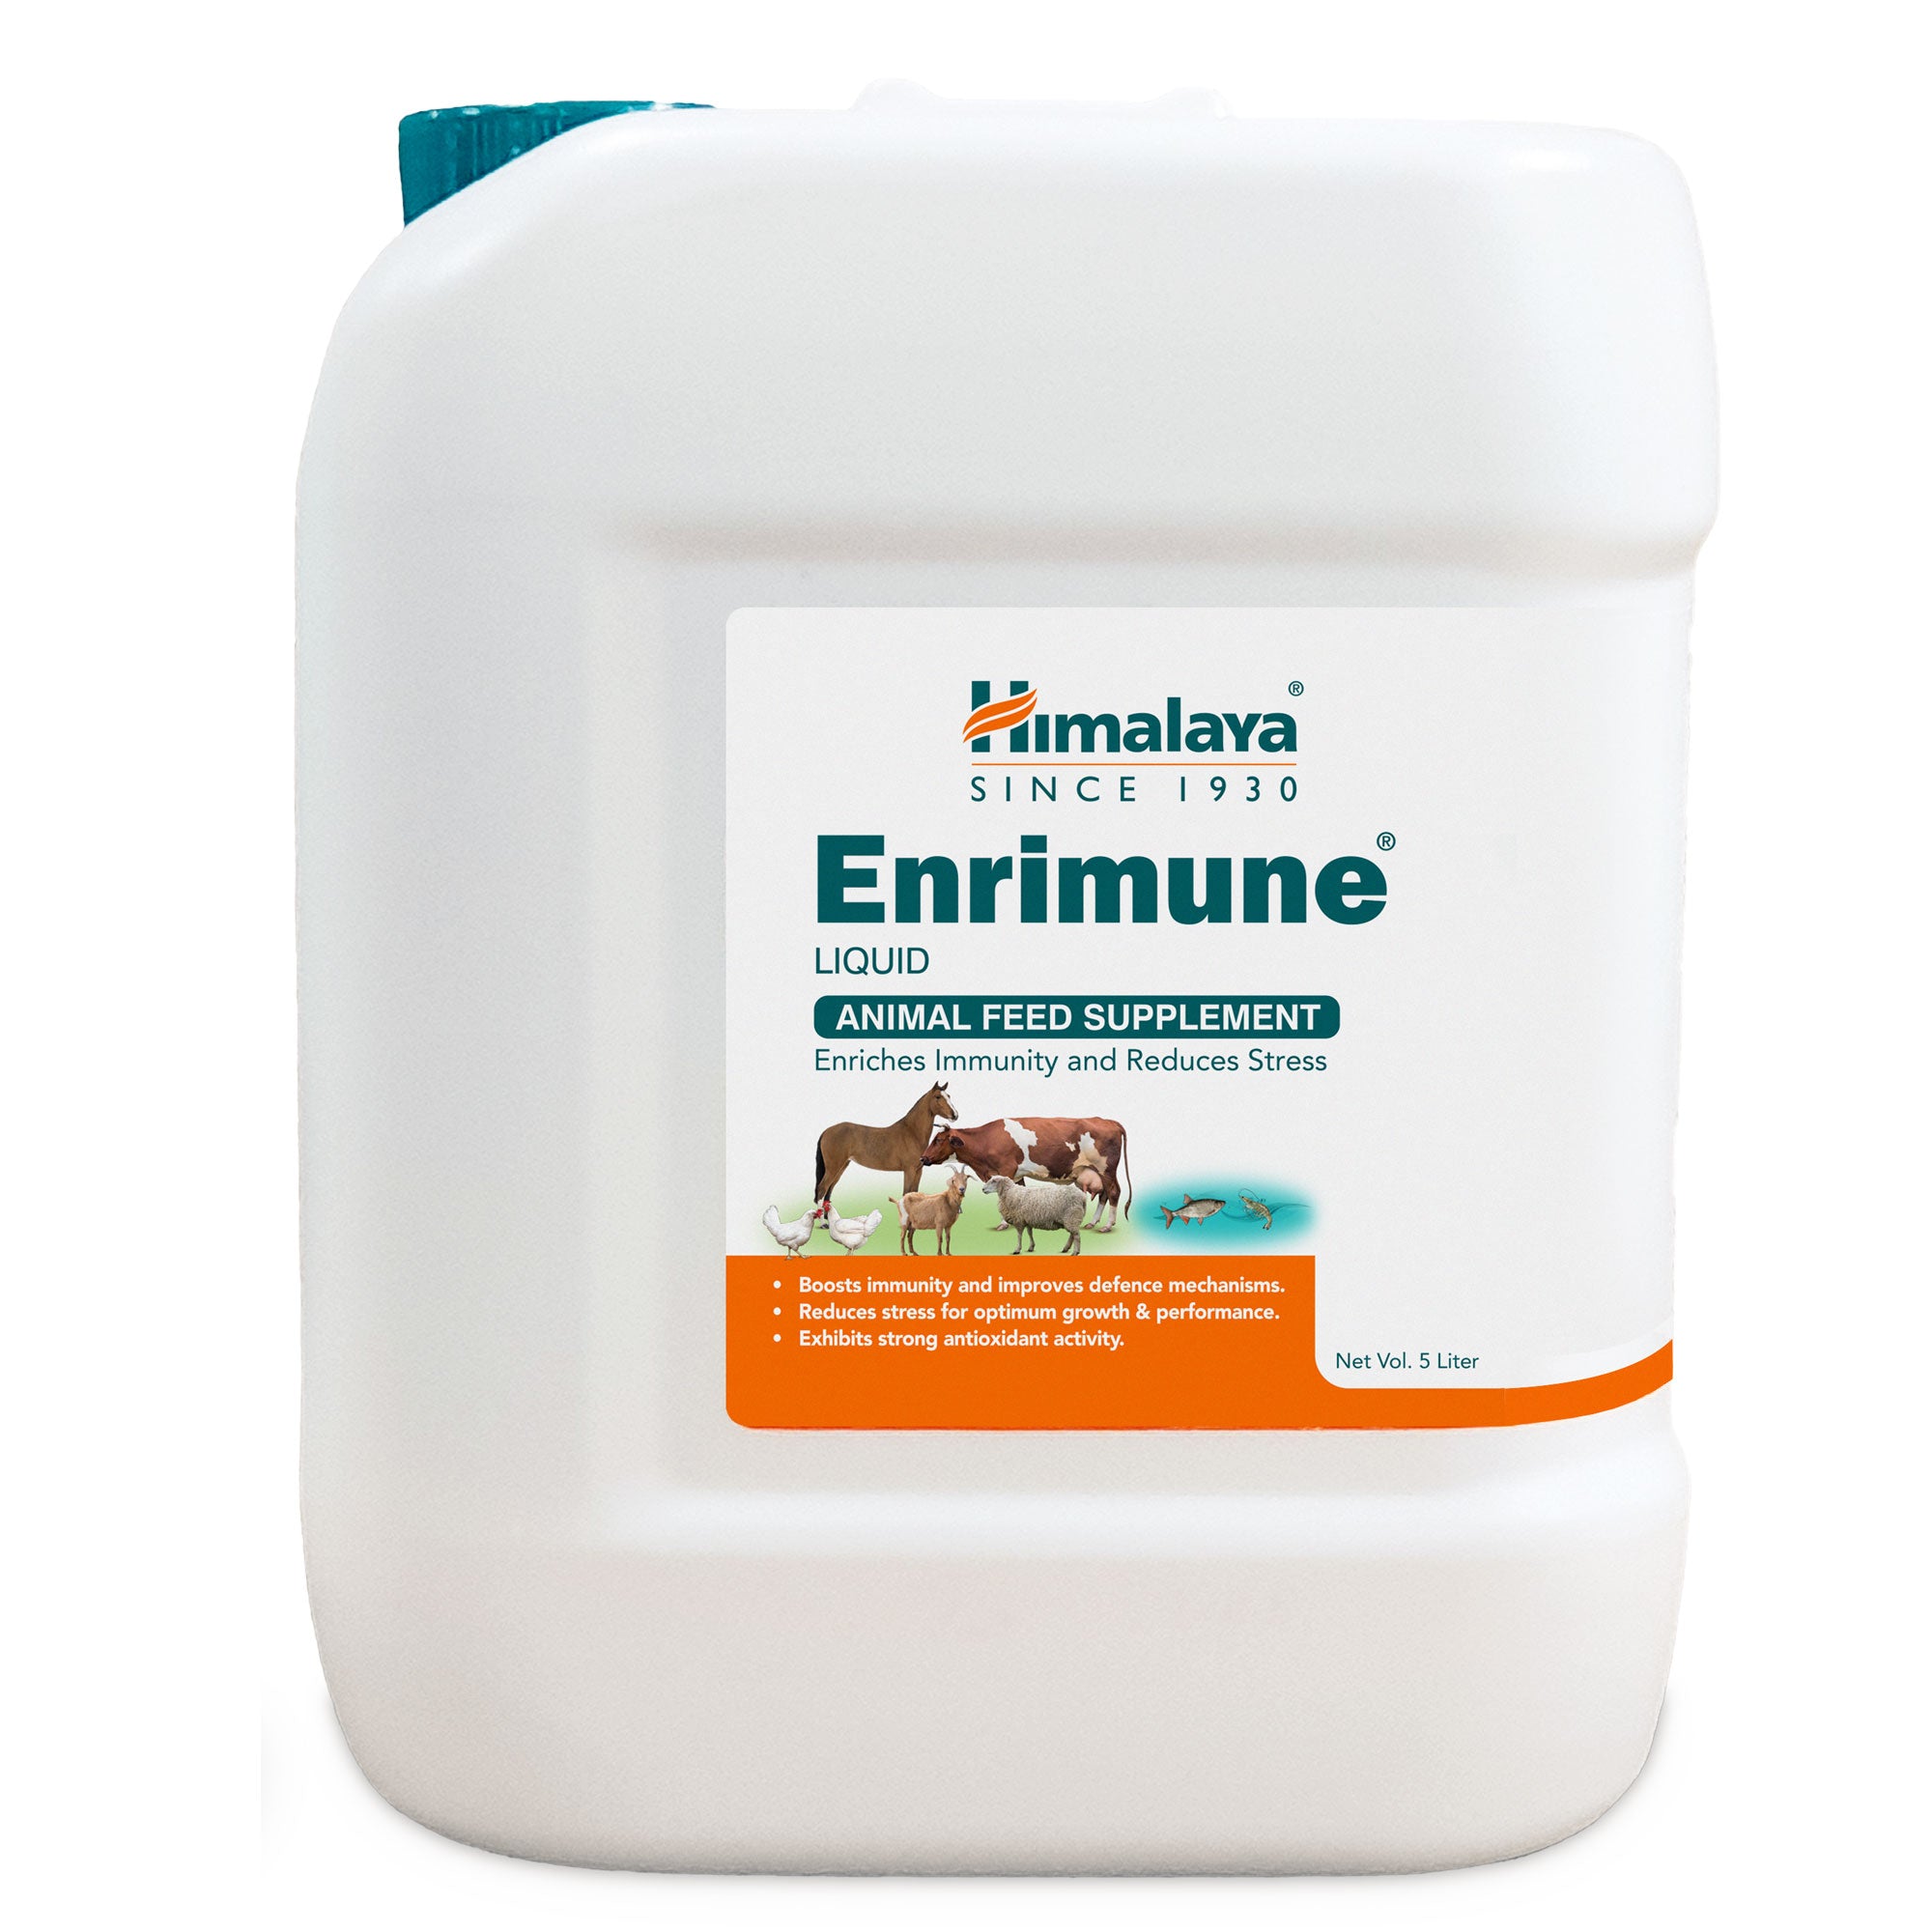 Himalaya Enrimune® - Boosts immunity and helps reduce stress for Animals - 5 litres